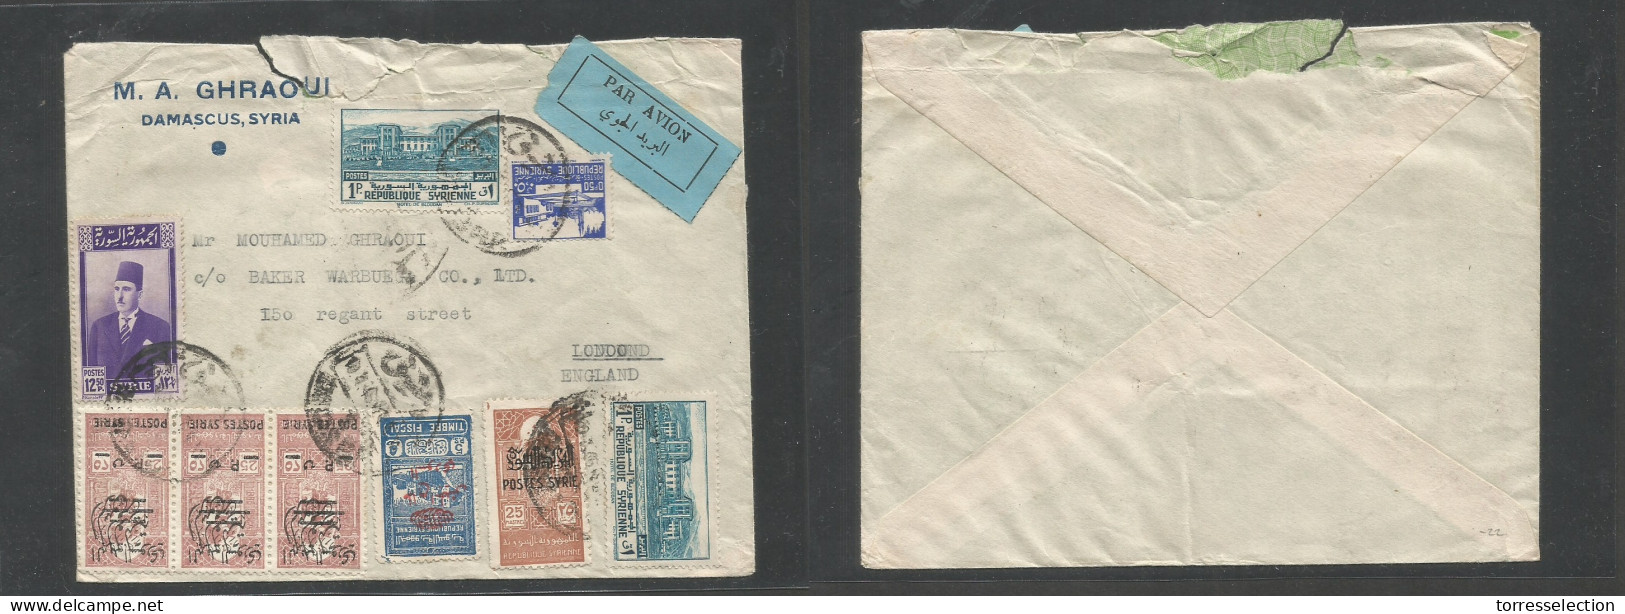 SYRIA. 1946 (10 April) Damasus - London, England. Air Multifkd Env Incl Triple Overprinted Provisional Fiscals Sttamps ( - Syrien